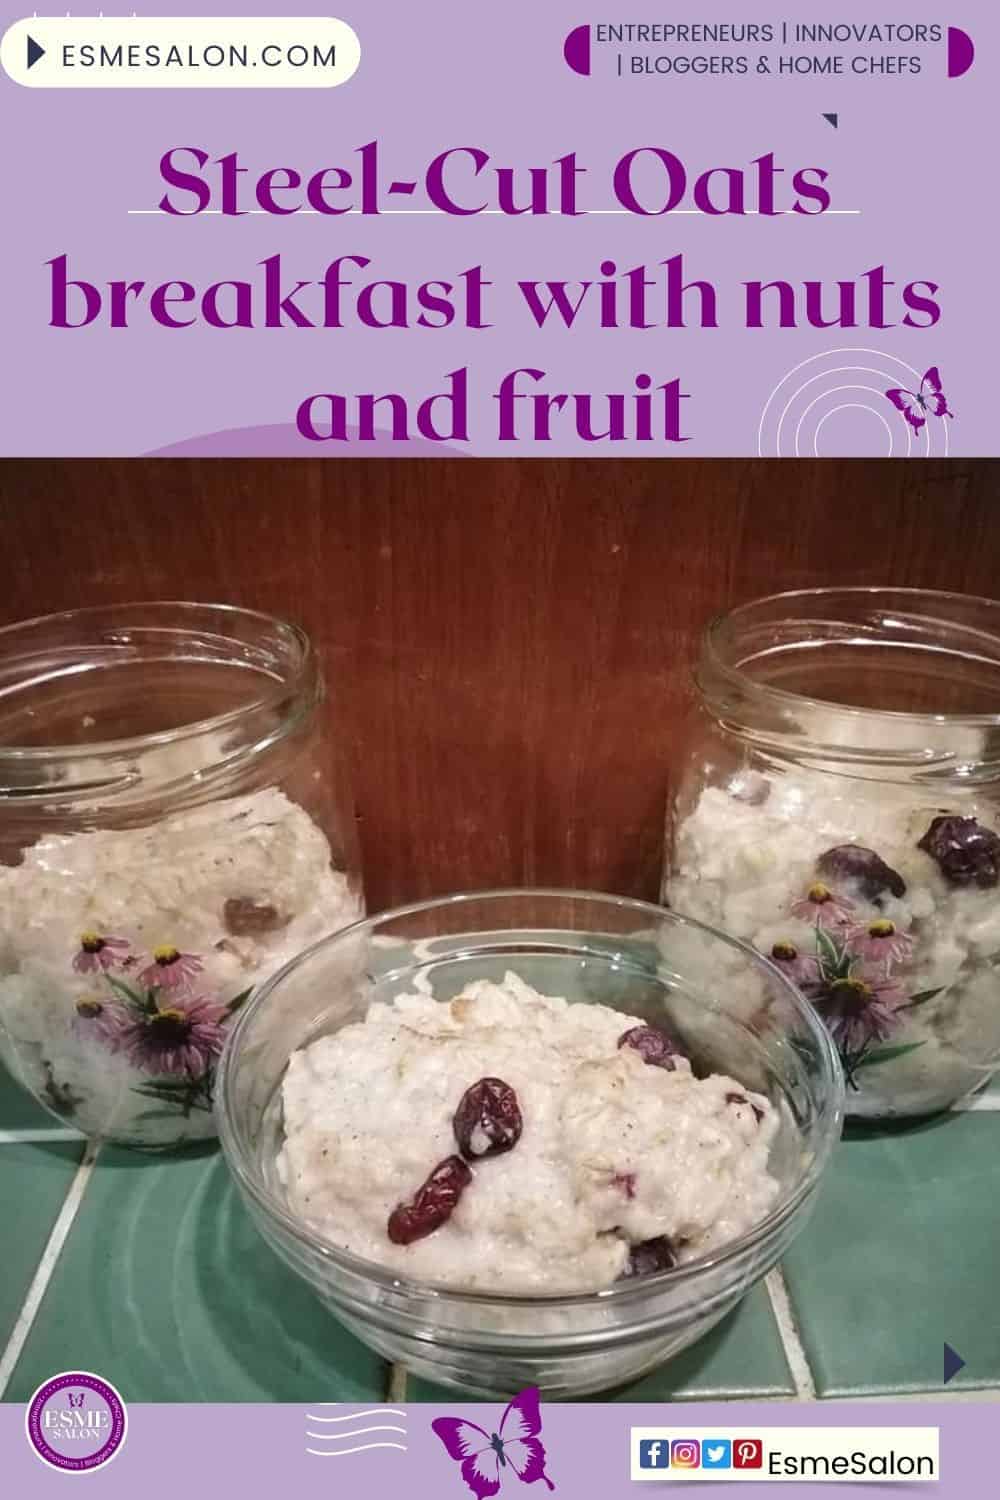 An image of 3 glass jars filled with Steel-Cut Oats breakfast with nuts and fruit